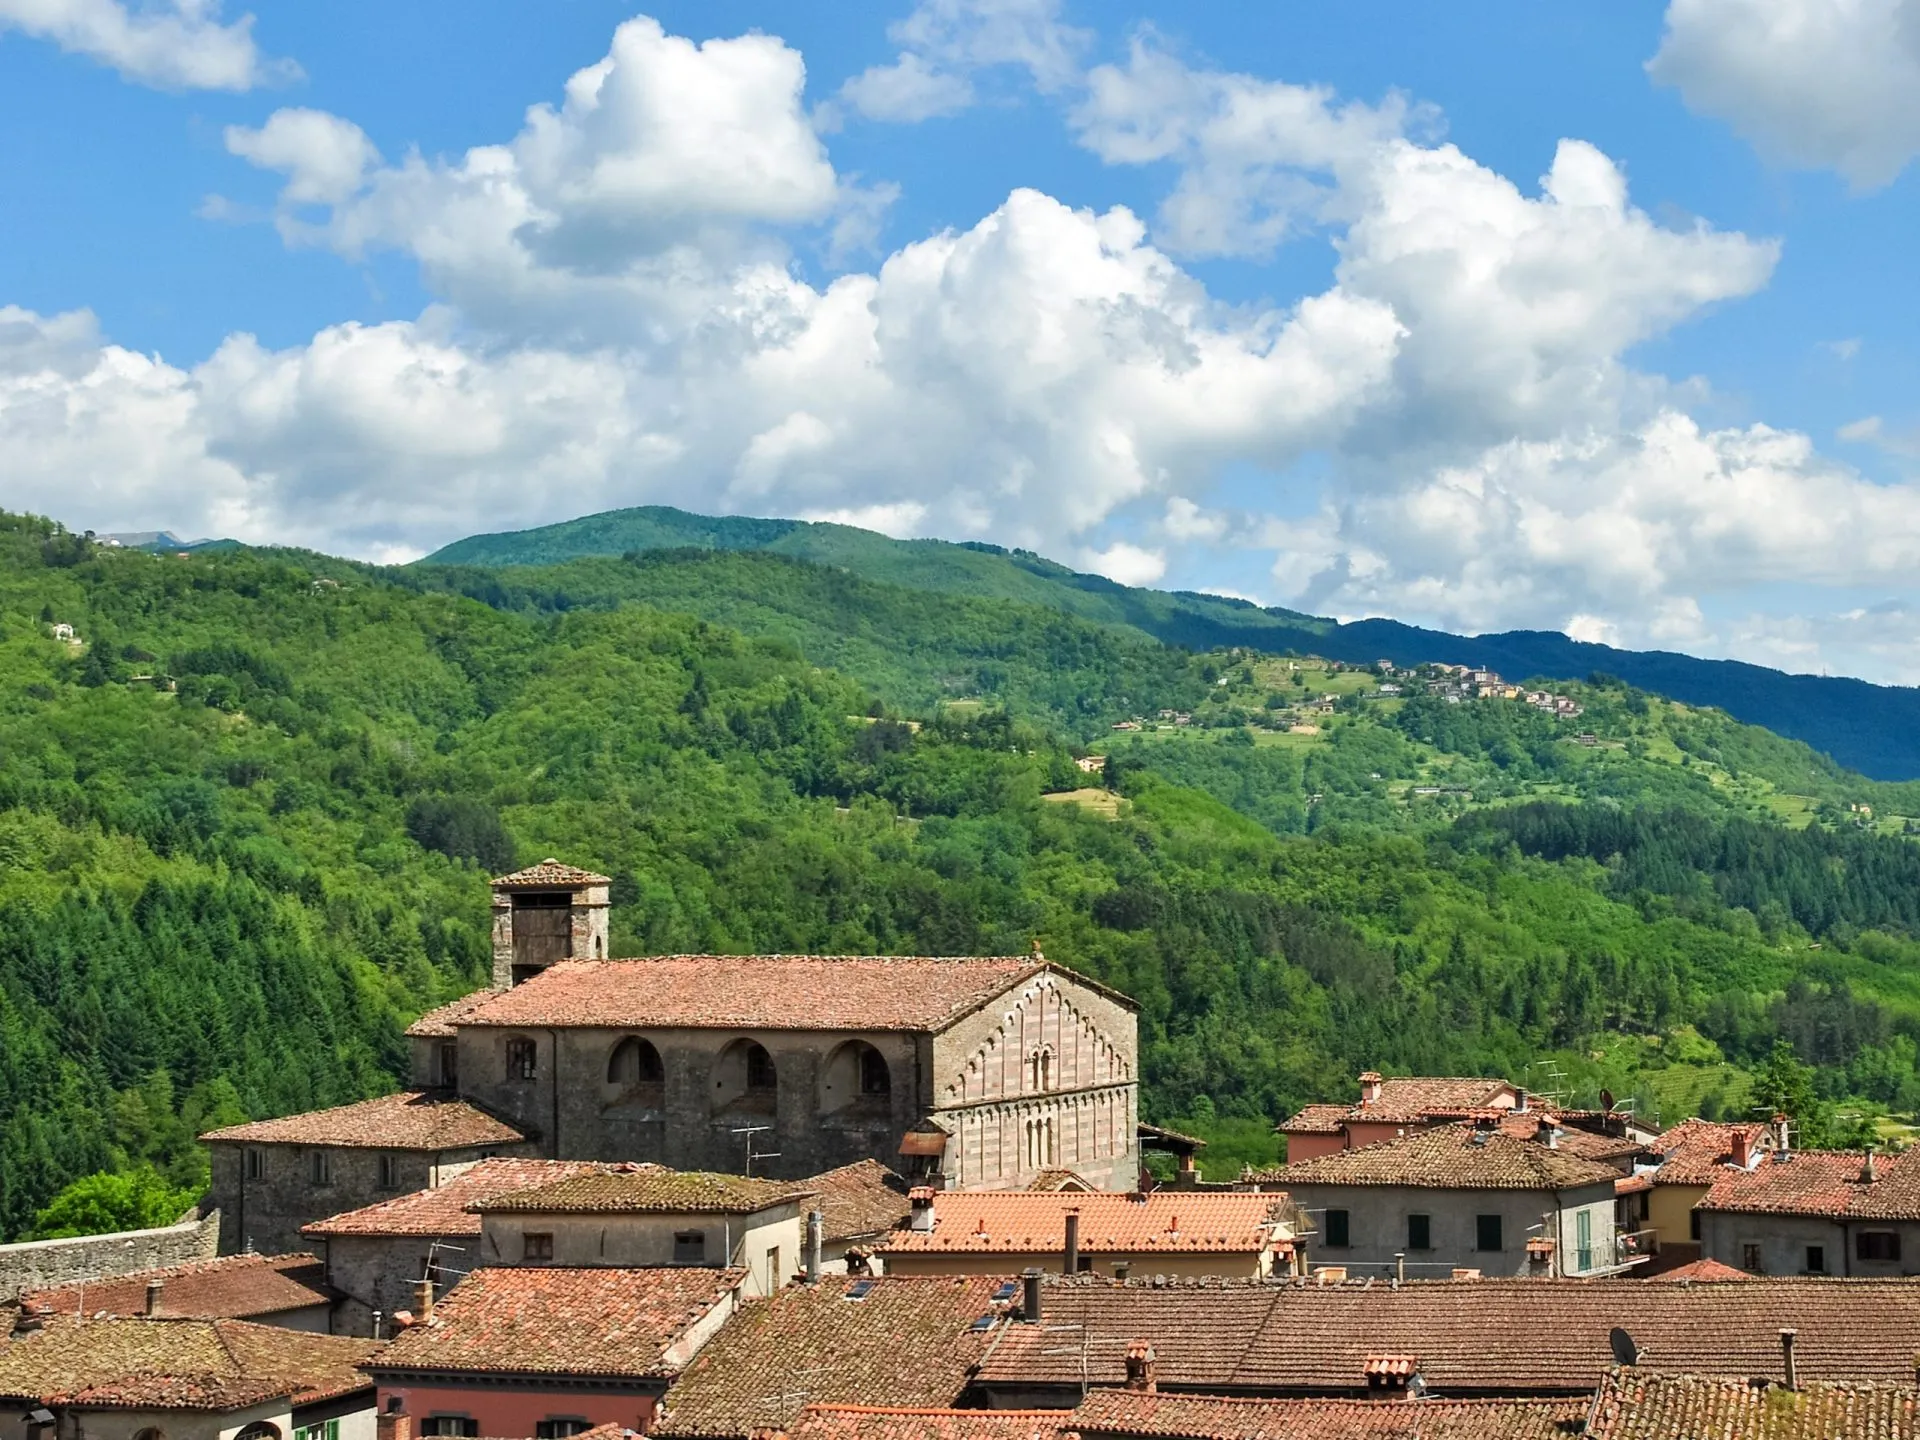 View of Castiglione di Garfagnana, a small town in Tuscany (Italy), with surrounding hills in background